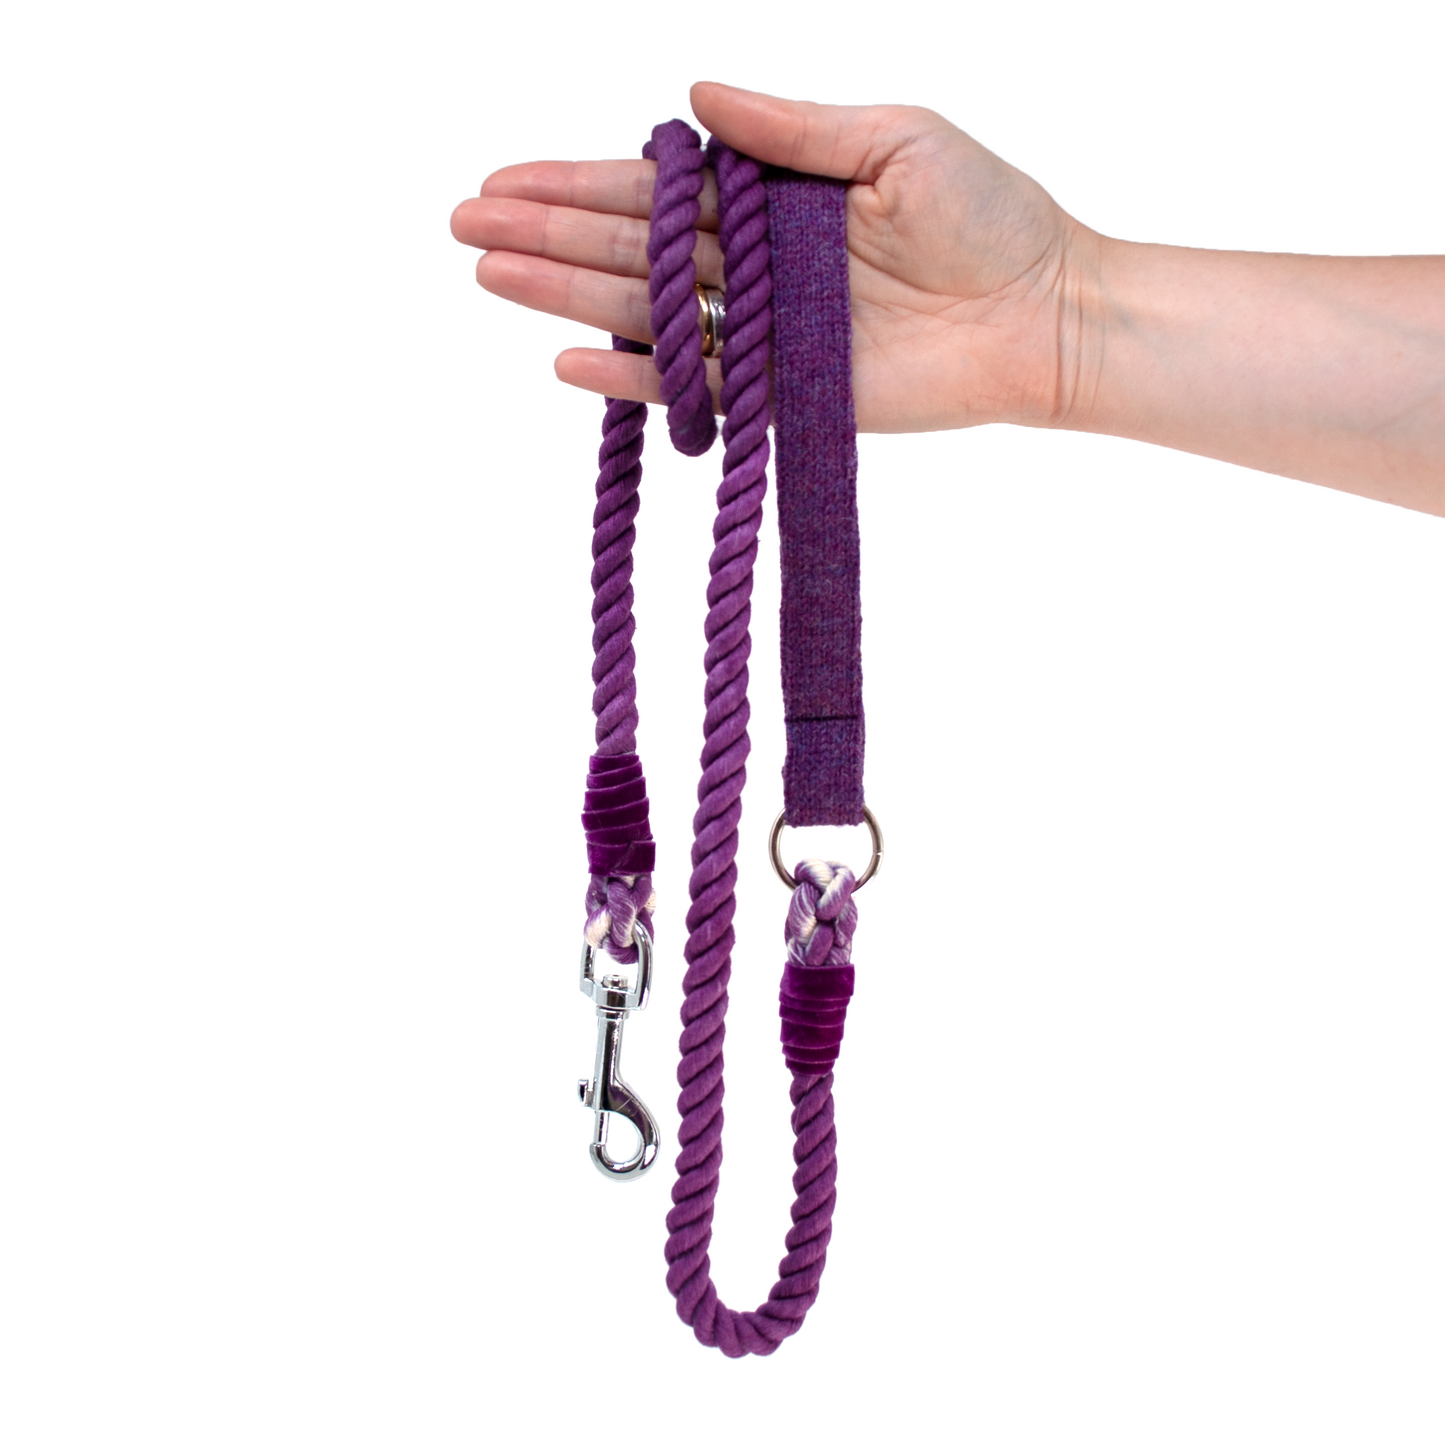 Parma - Autumn/Winter '23 Collection - Rope Dog Lead